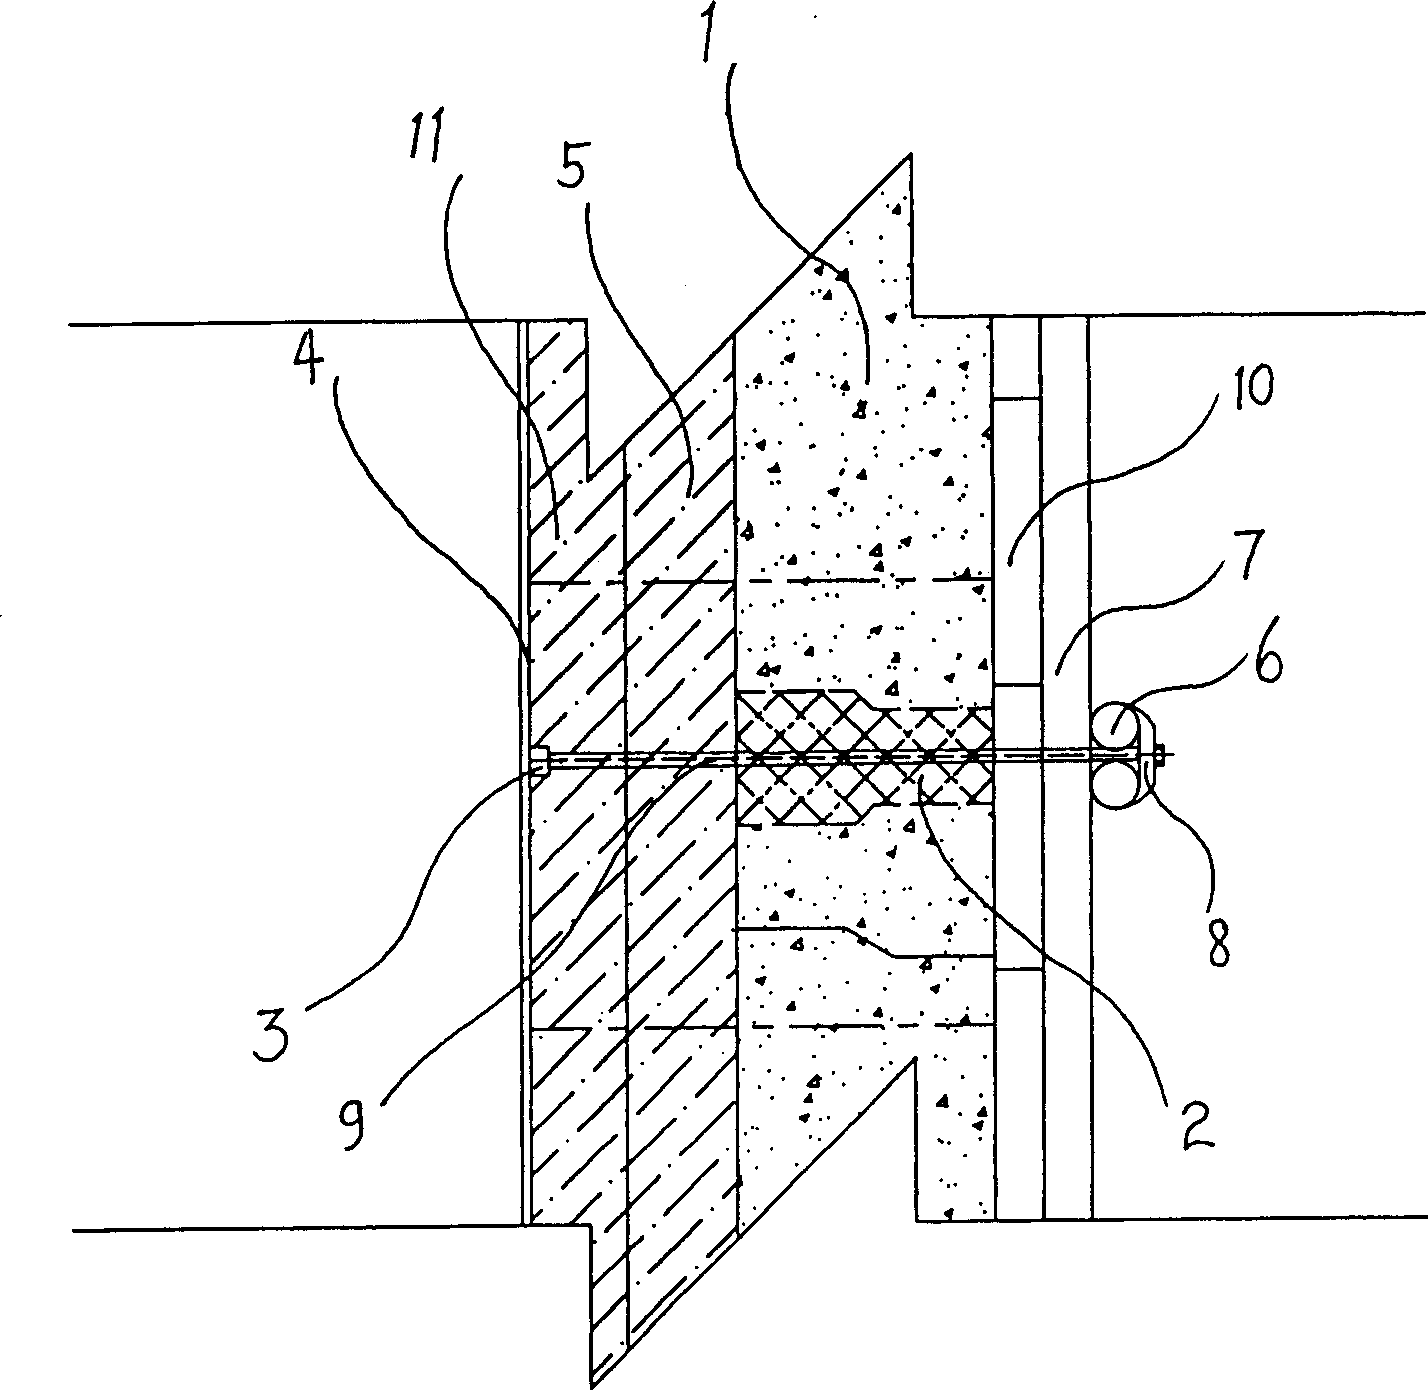 Formwork metthod for paired drawing walls of furnace in integral cast structural furnace